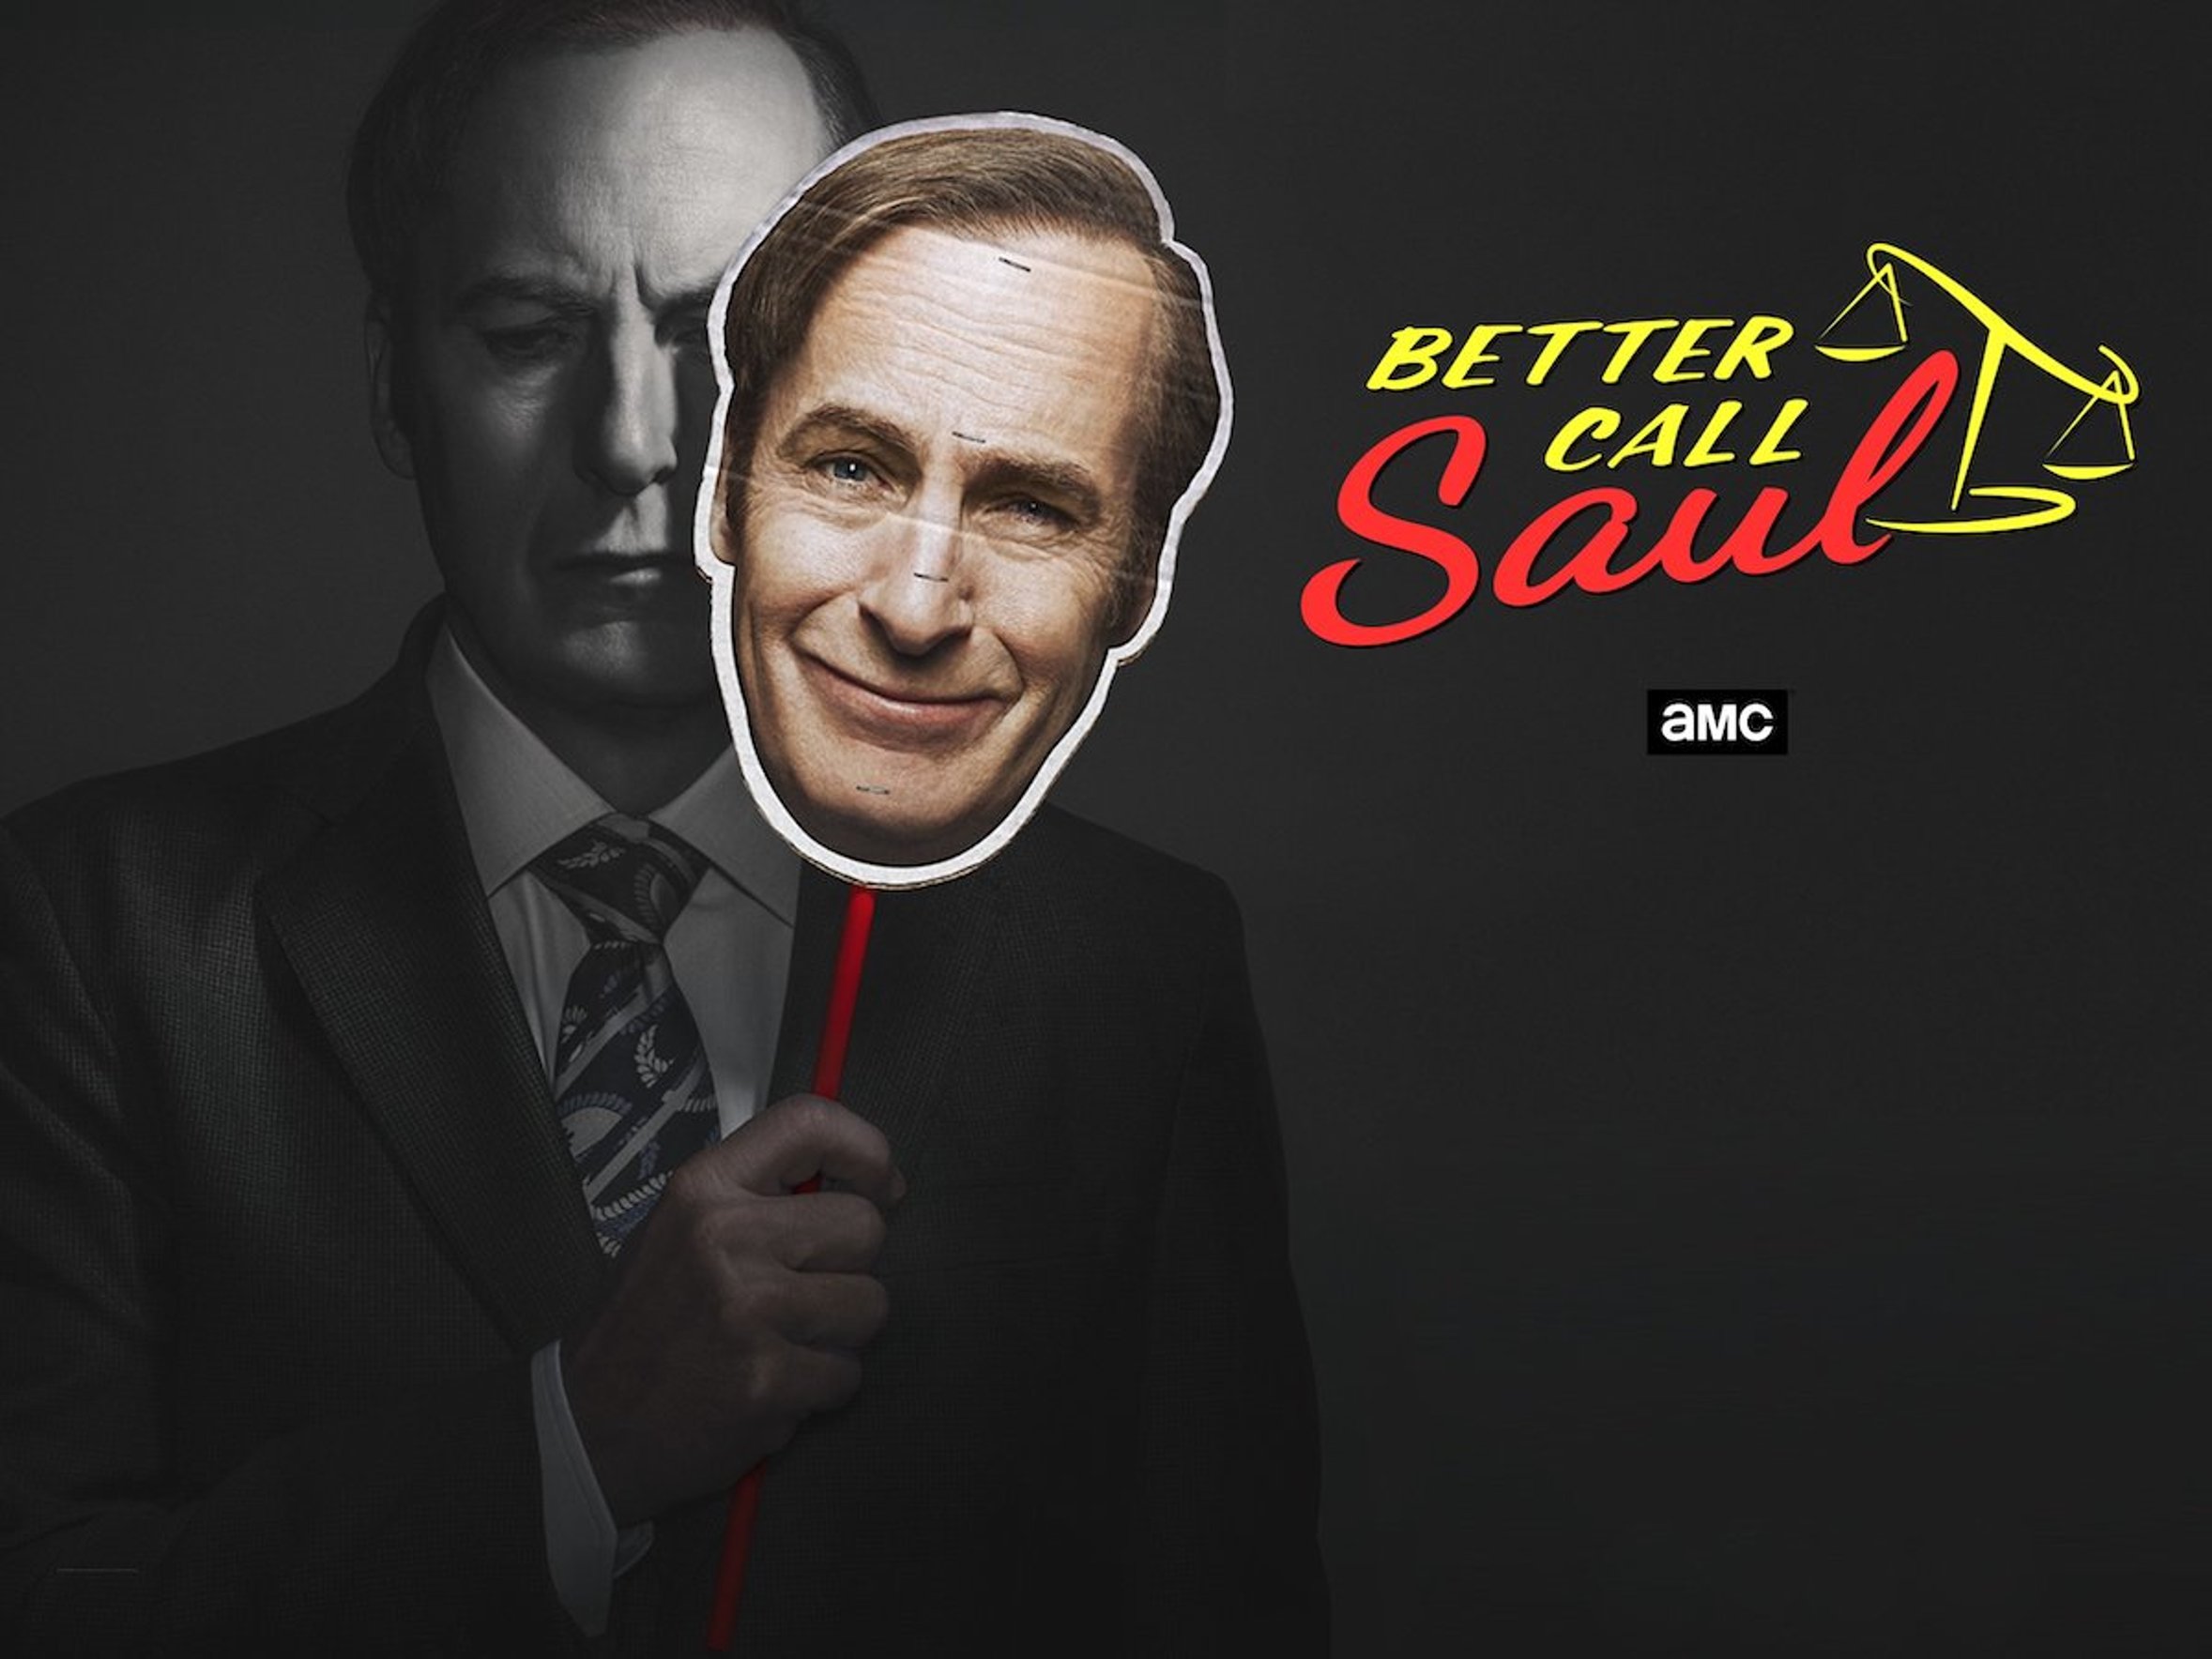 AMC’S Better Call Saul Is Casting for New Faces